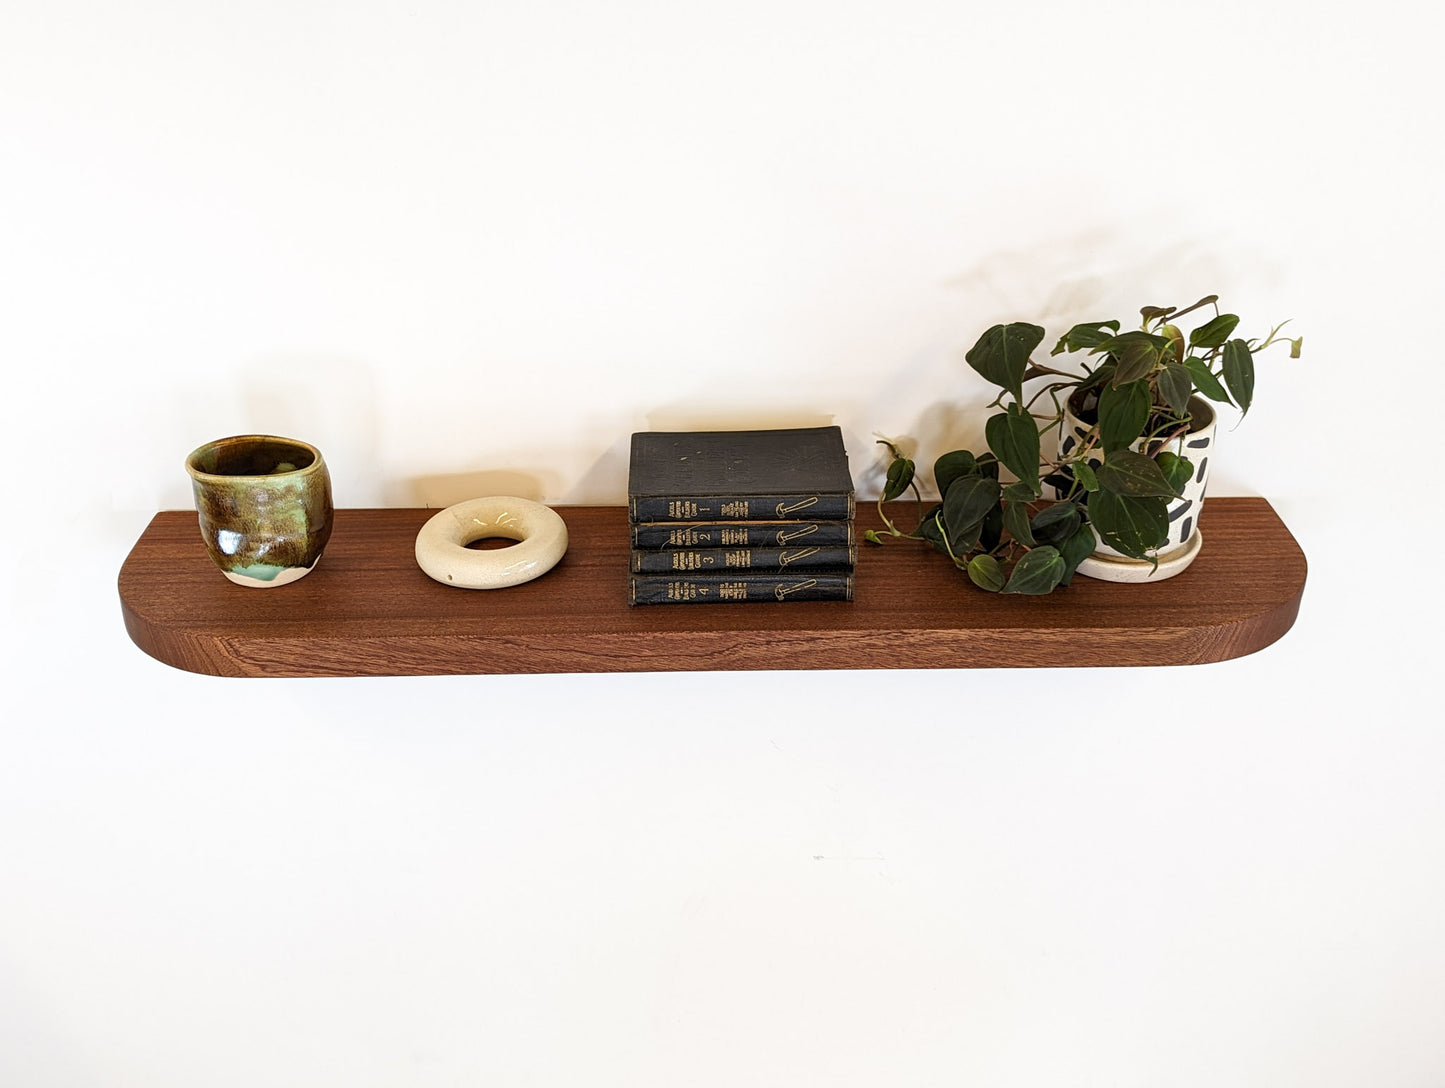 Thick Mahogany Floating Shelf with Rounded Corners